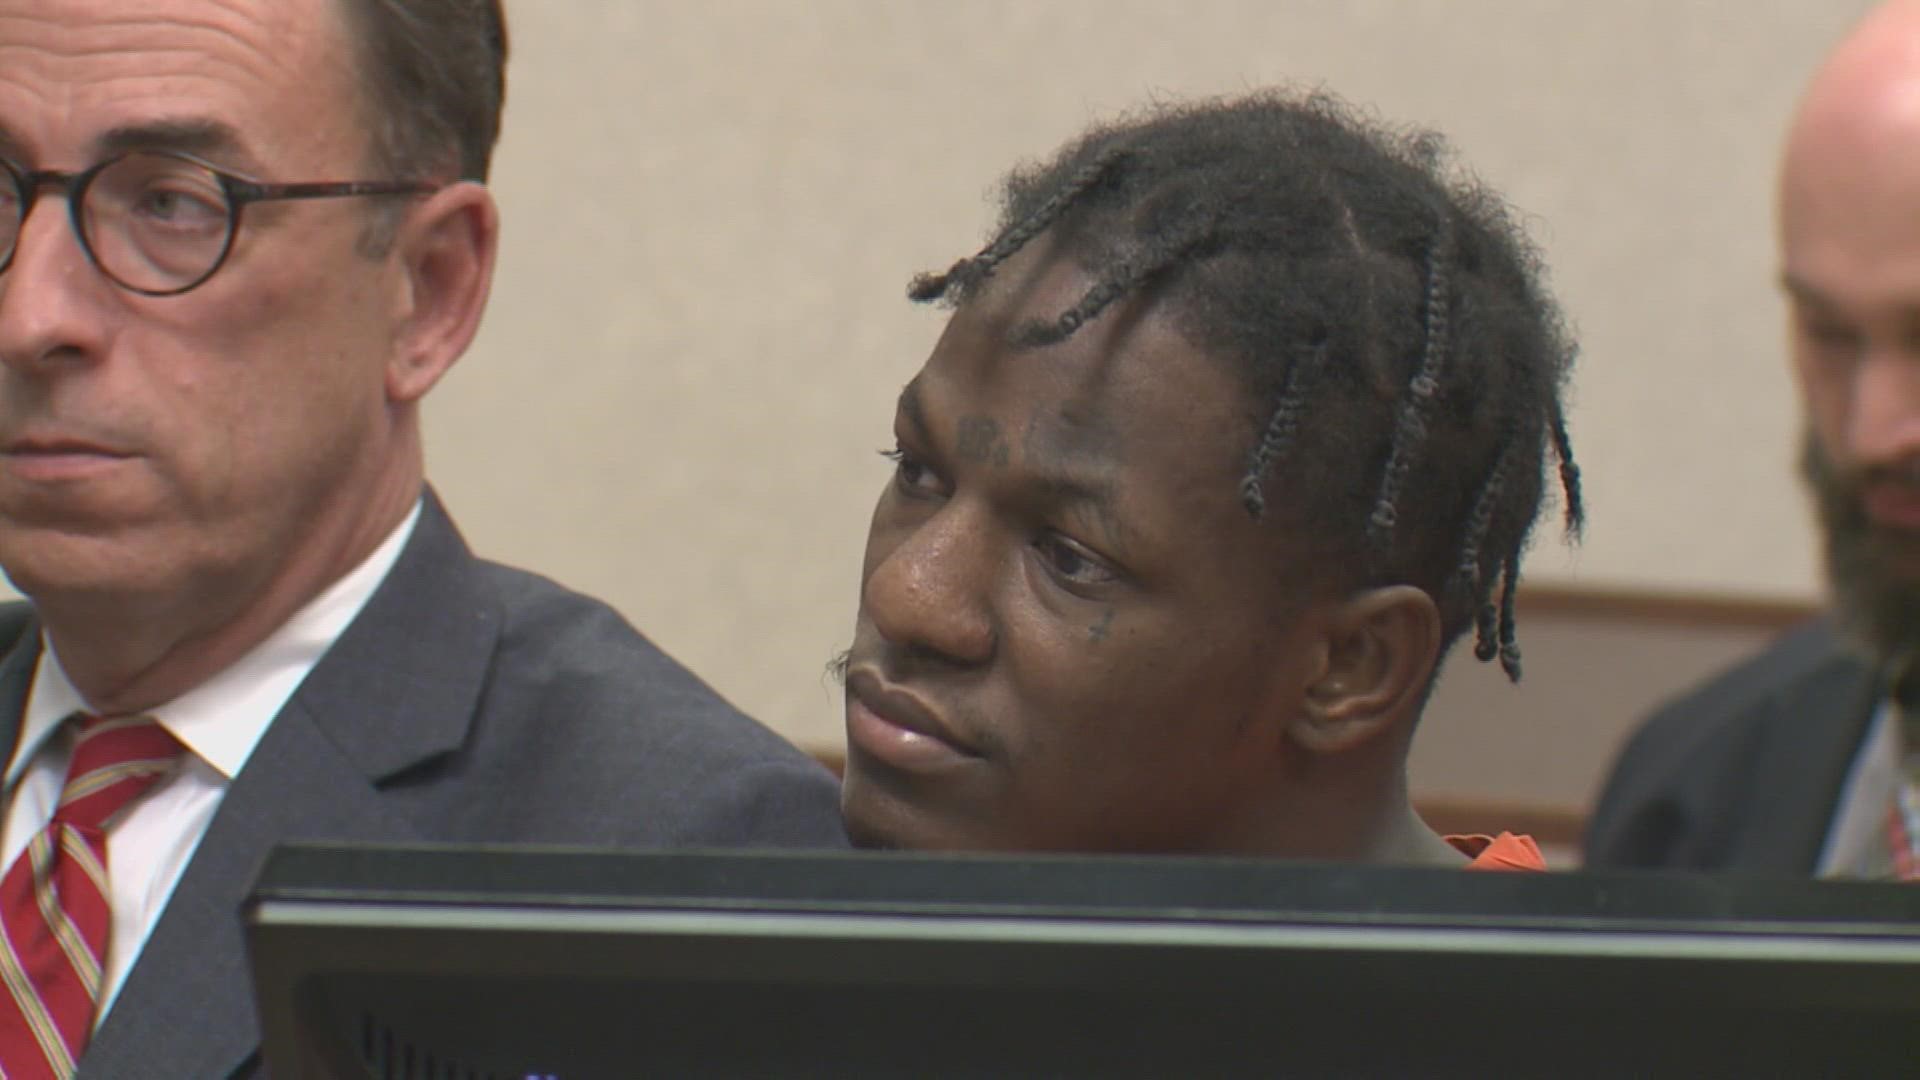 Kevon Lawless was found guilty for the murder of Brandon Waddles and his 3 year old daughter, Trinity Randolph.